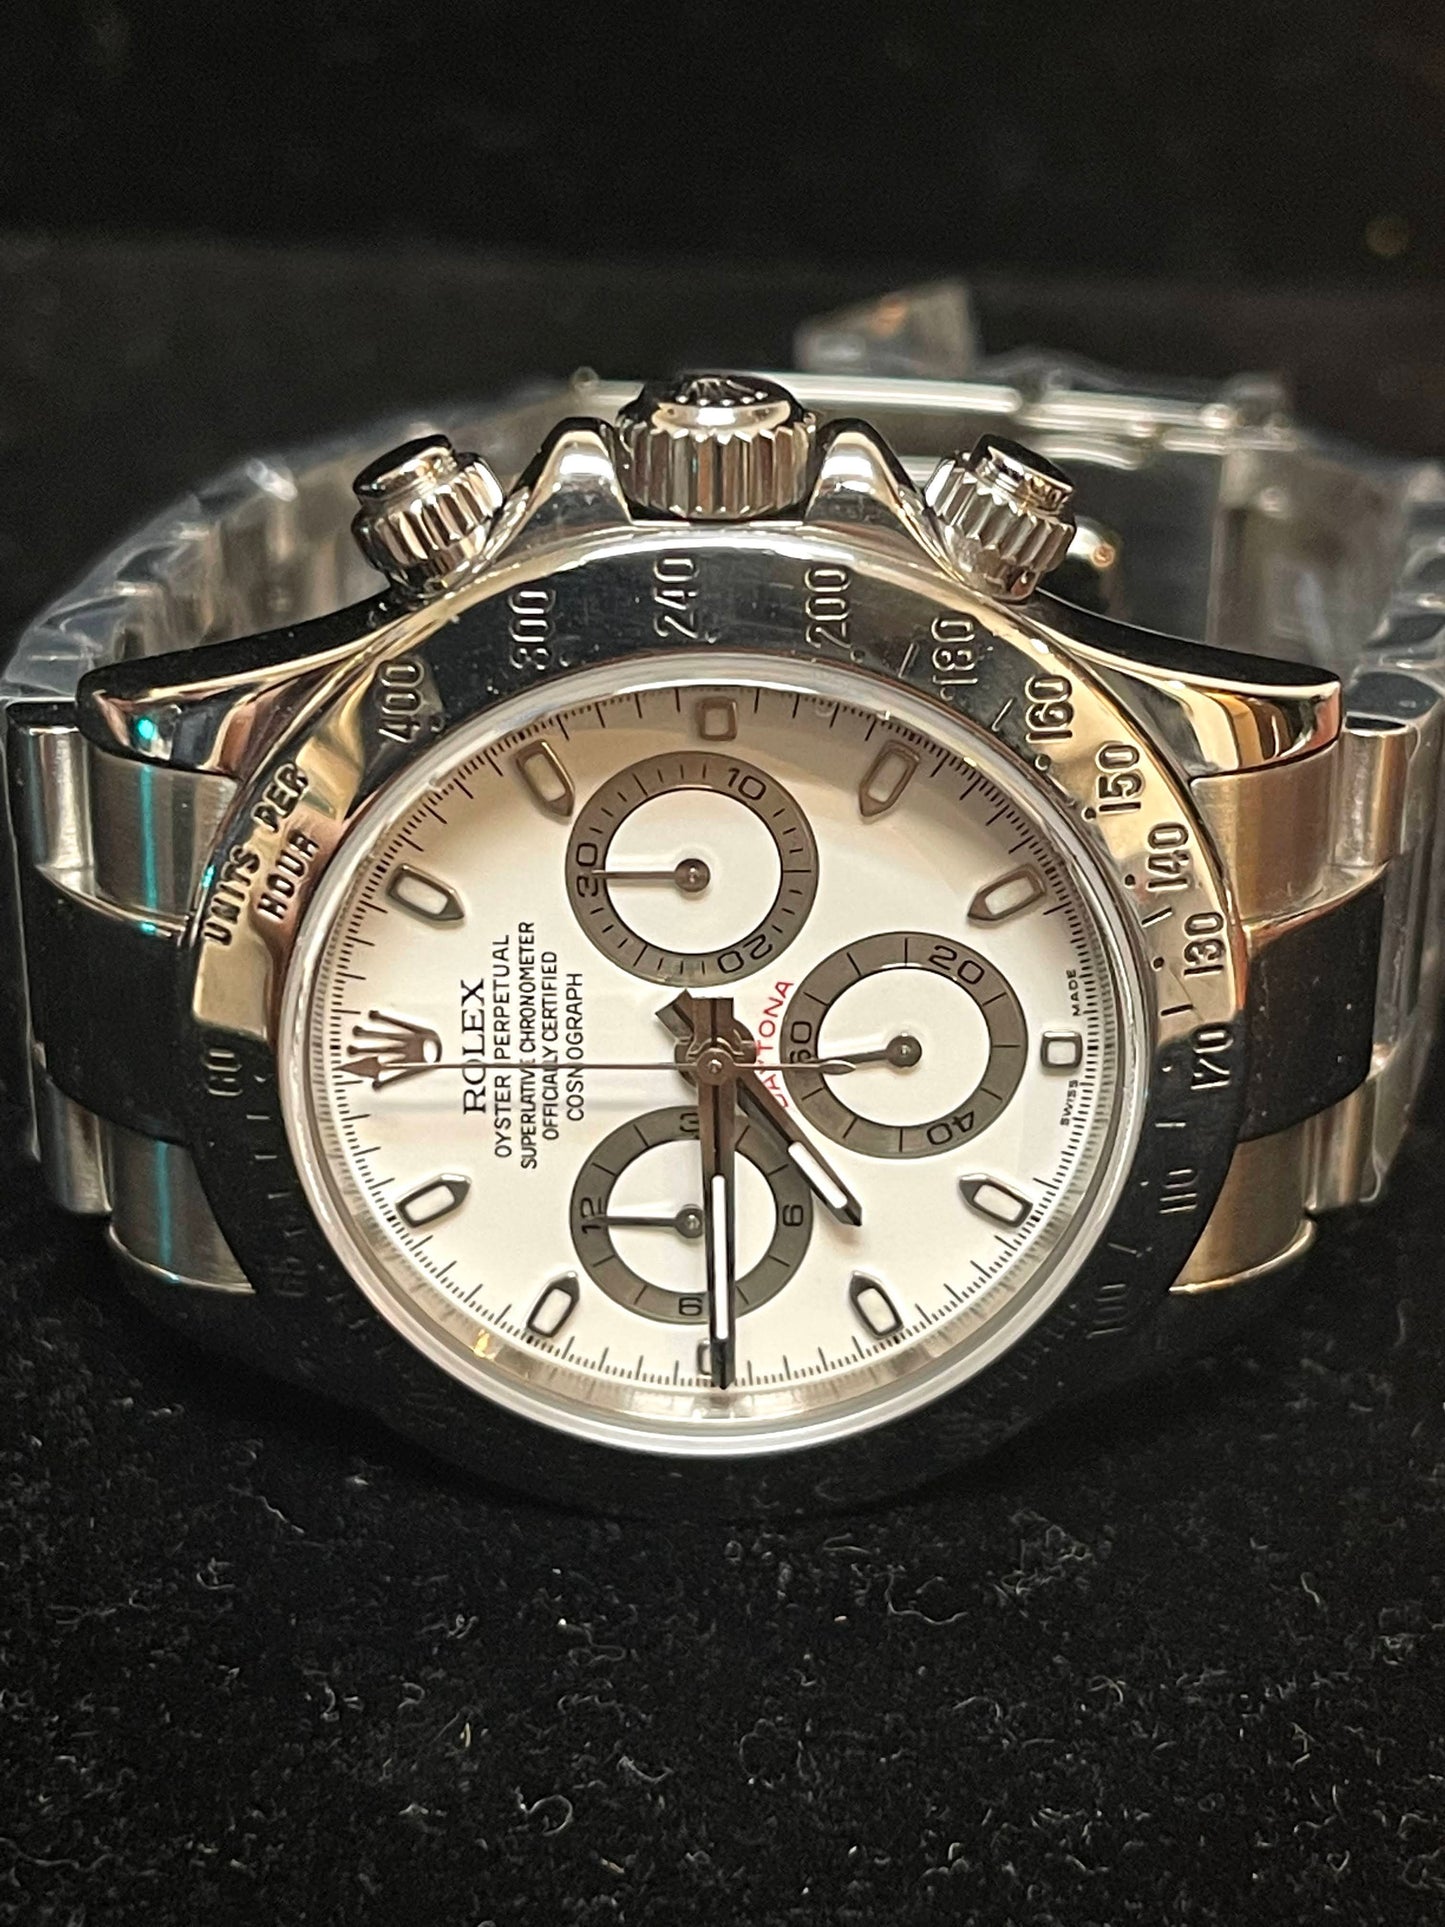 2006 Rolex Daytona 116520 White Dial Oyster Bracelet No Papers 40mm